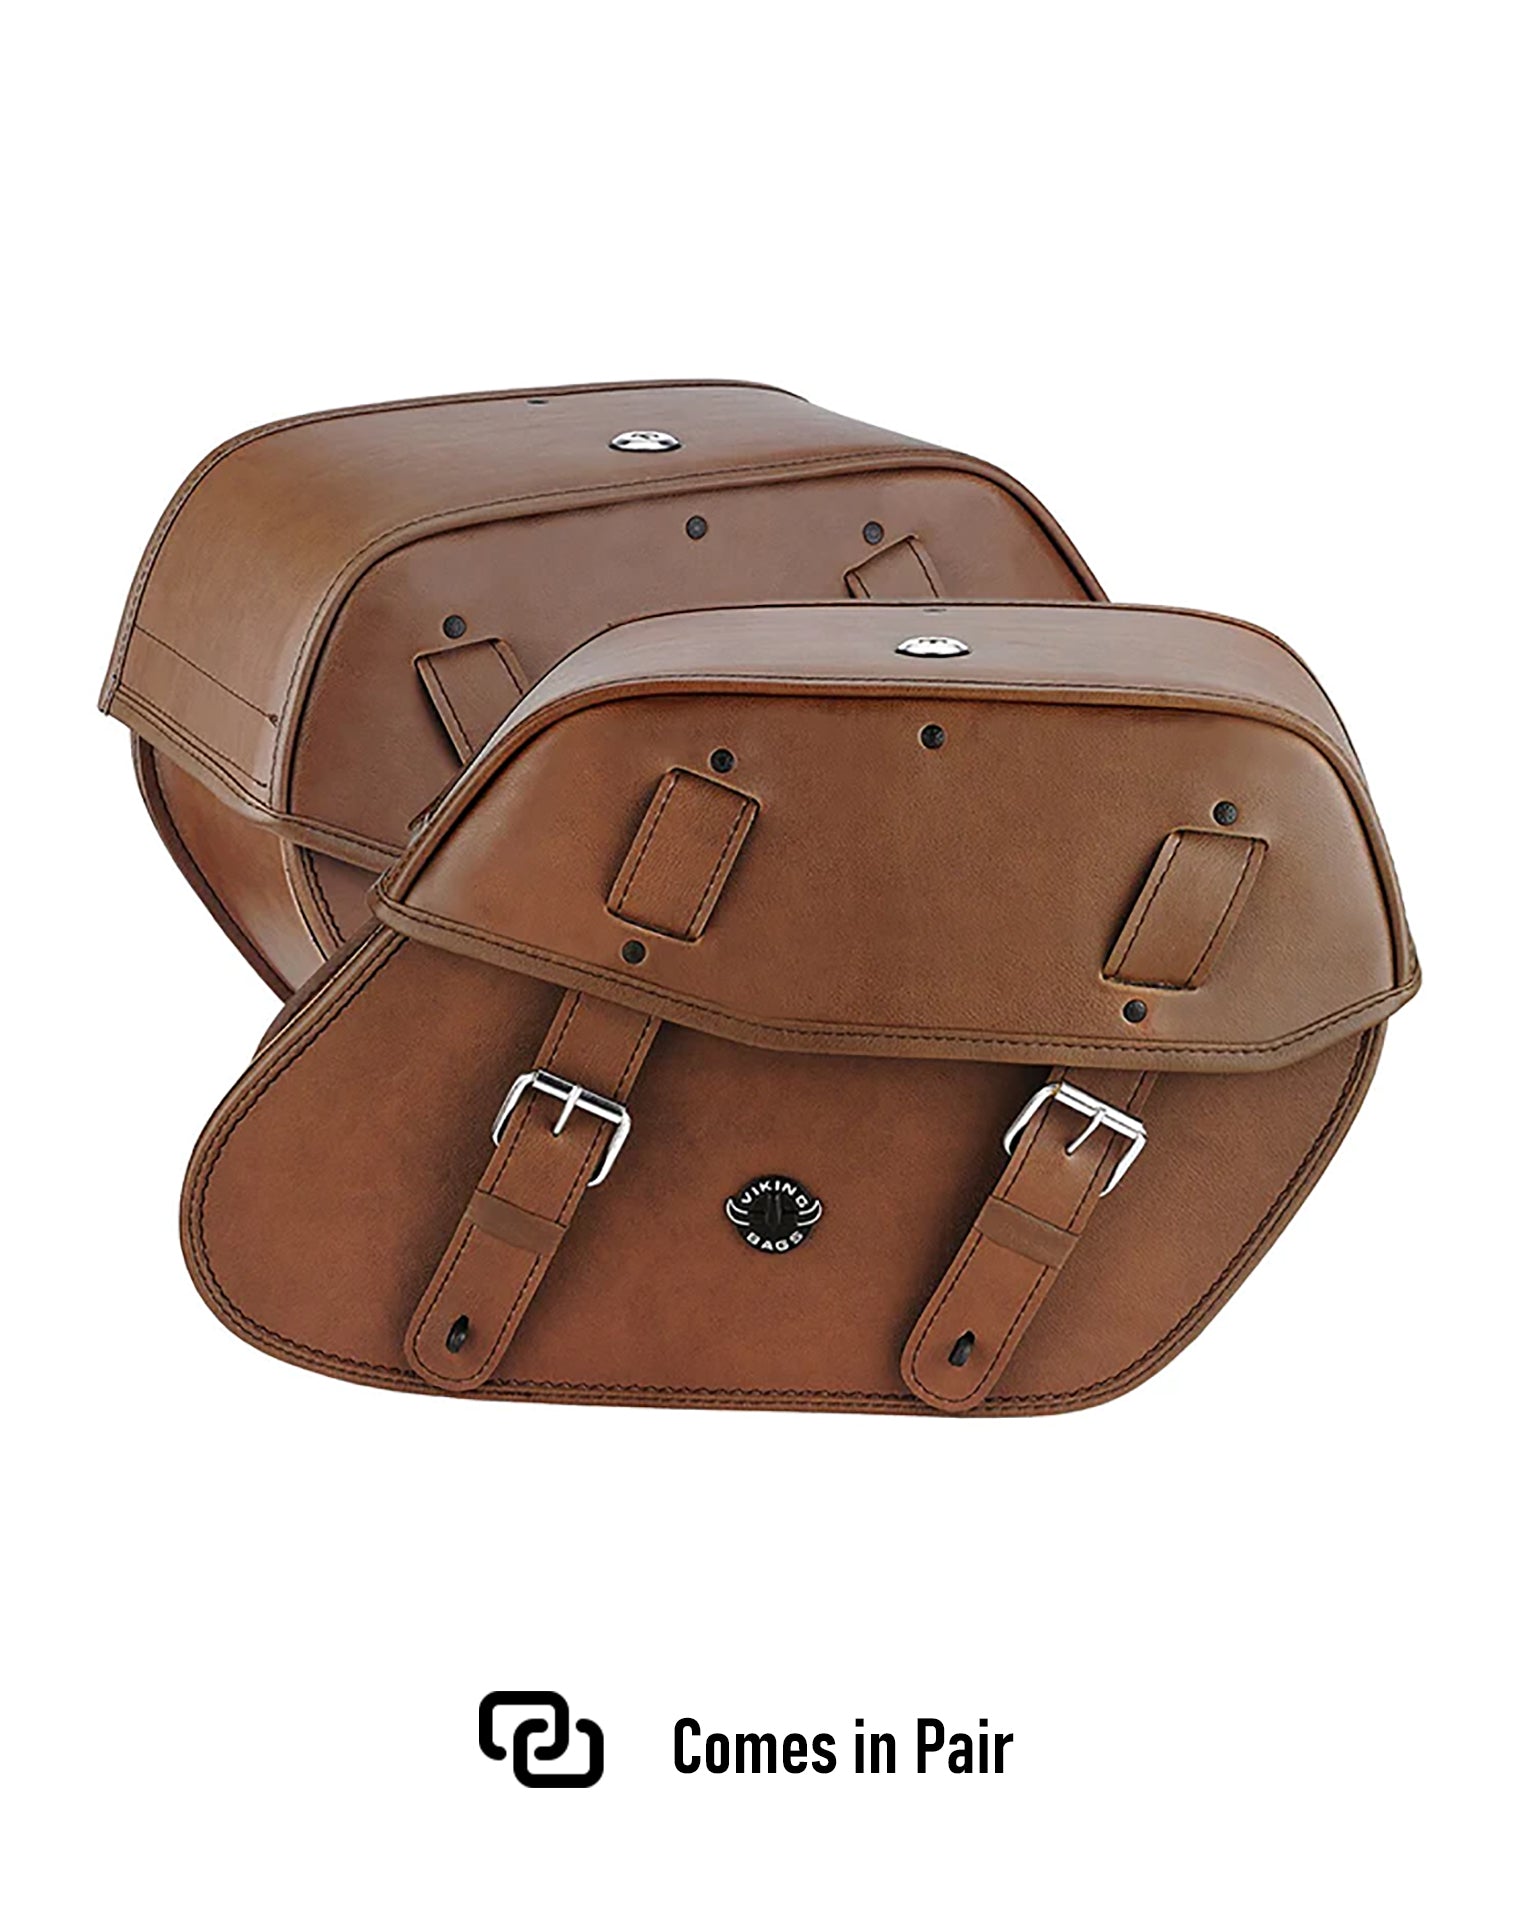 Viking Odin Brown Large Indian Scout Sixty Leather Motorcycle Saddlebags Weather Resistant Bags Comes in Pair